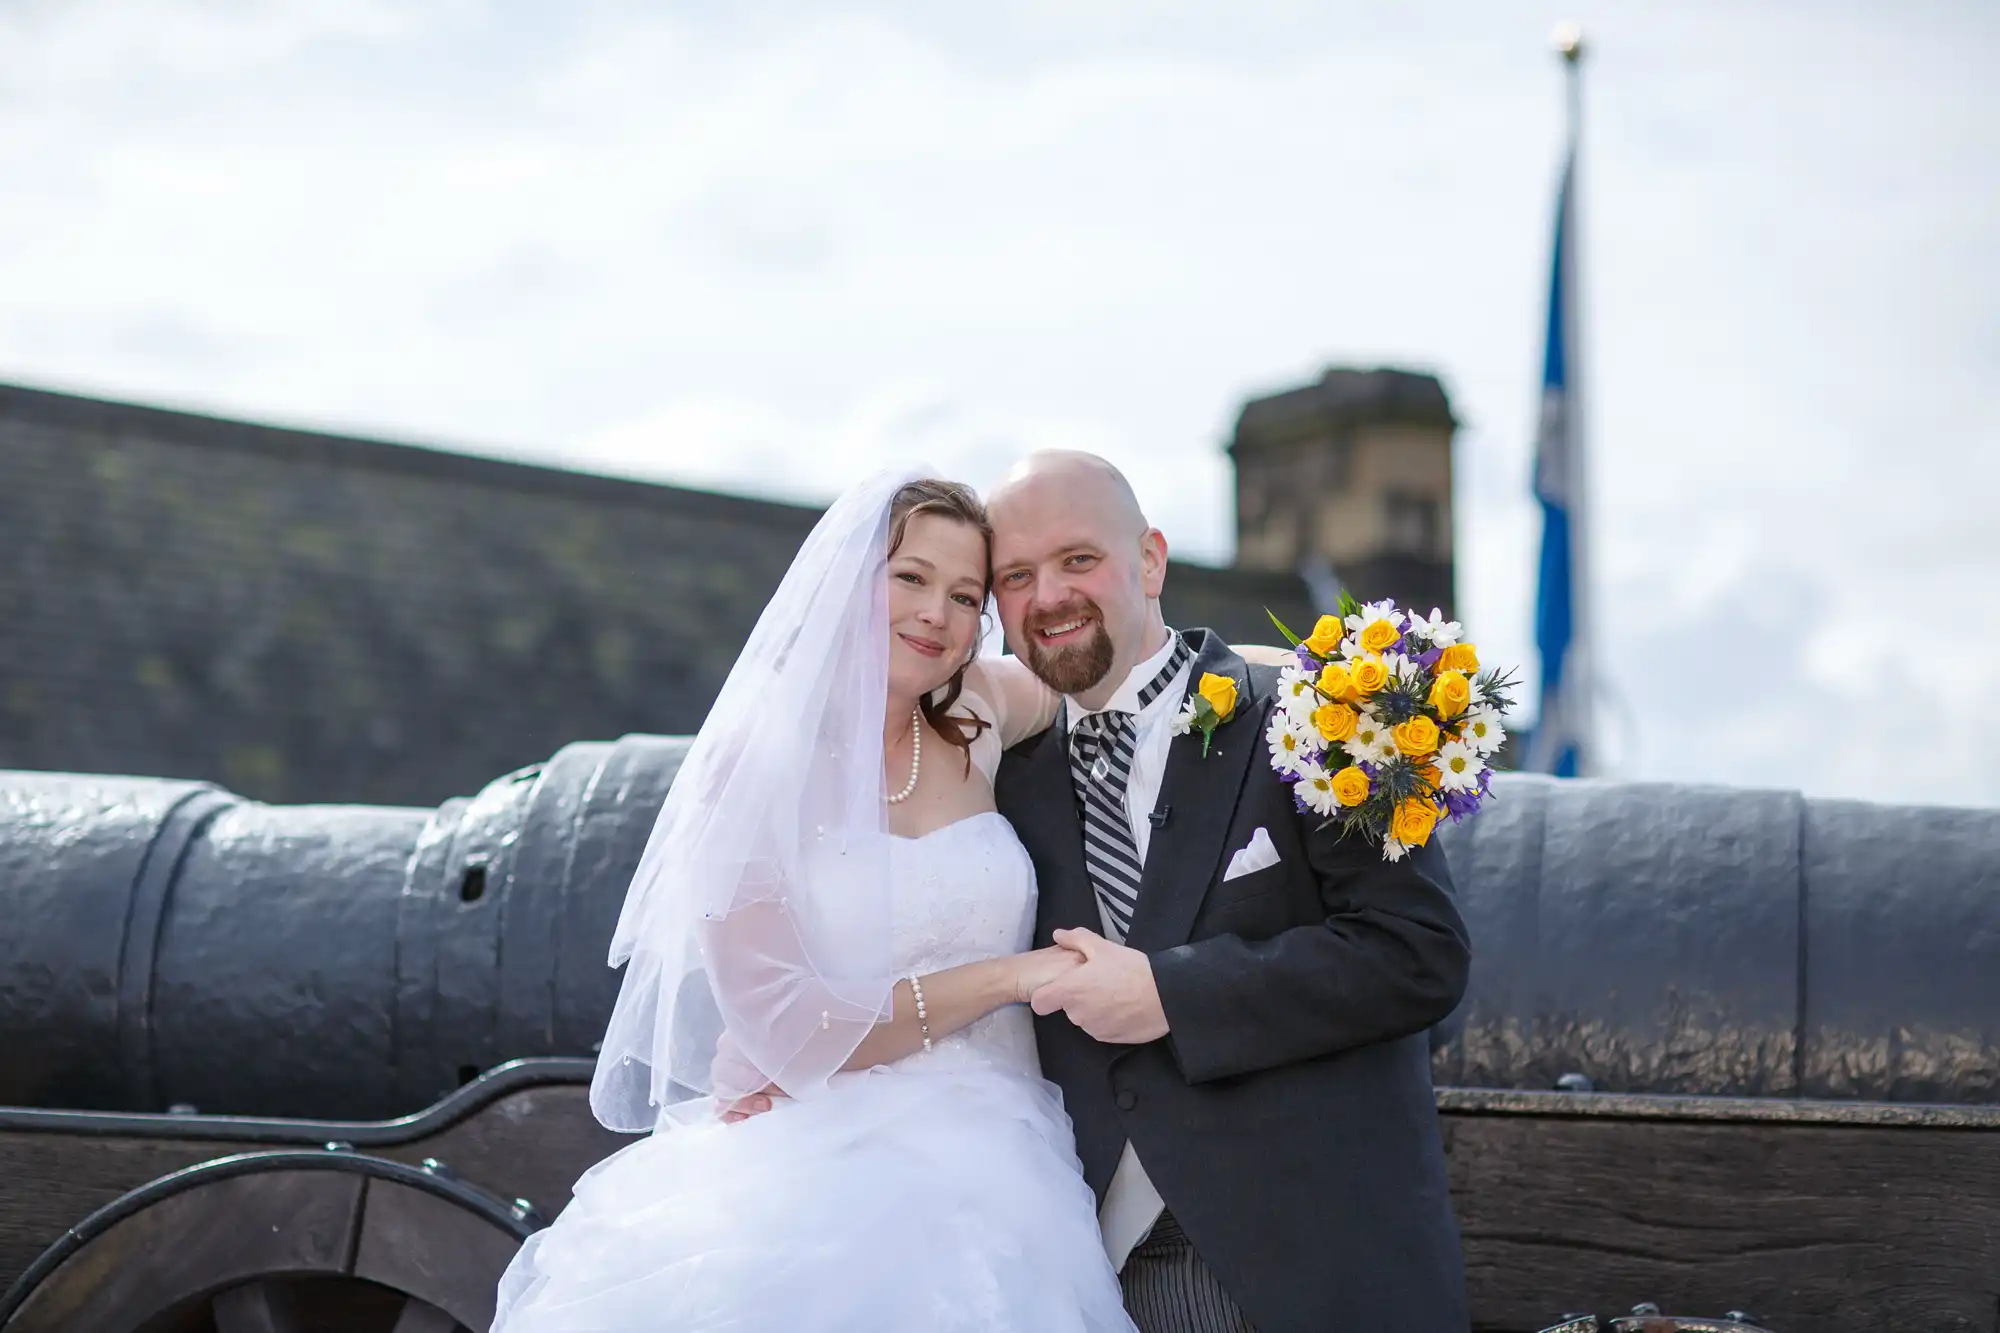 A bride and groom smiling at the camera, standing by an old cannon with a castle and a blue flag in the background. the bride holds a bouquet of yellow flowers.